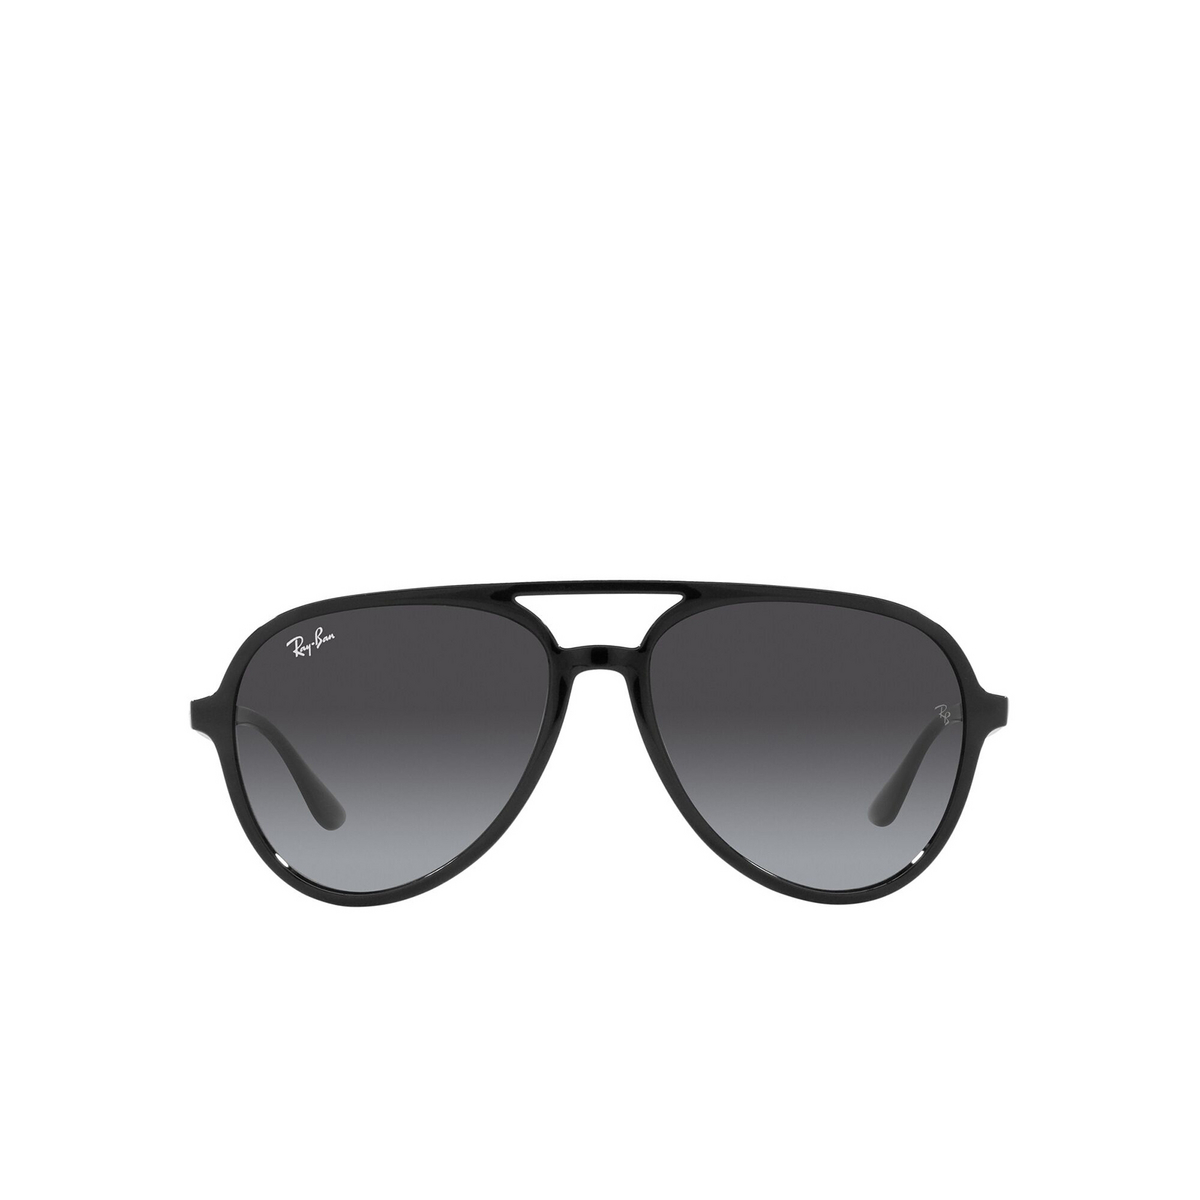 Ray-Ban® Aviator Sunglasses: RB4376 color Black 601/8G - front view.